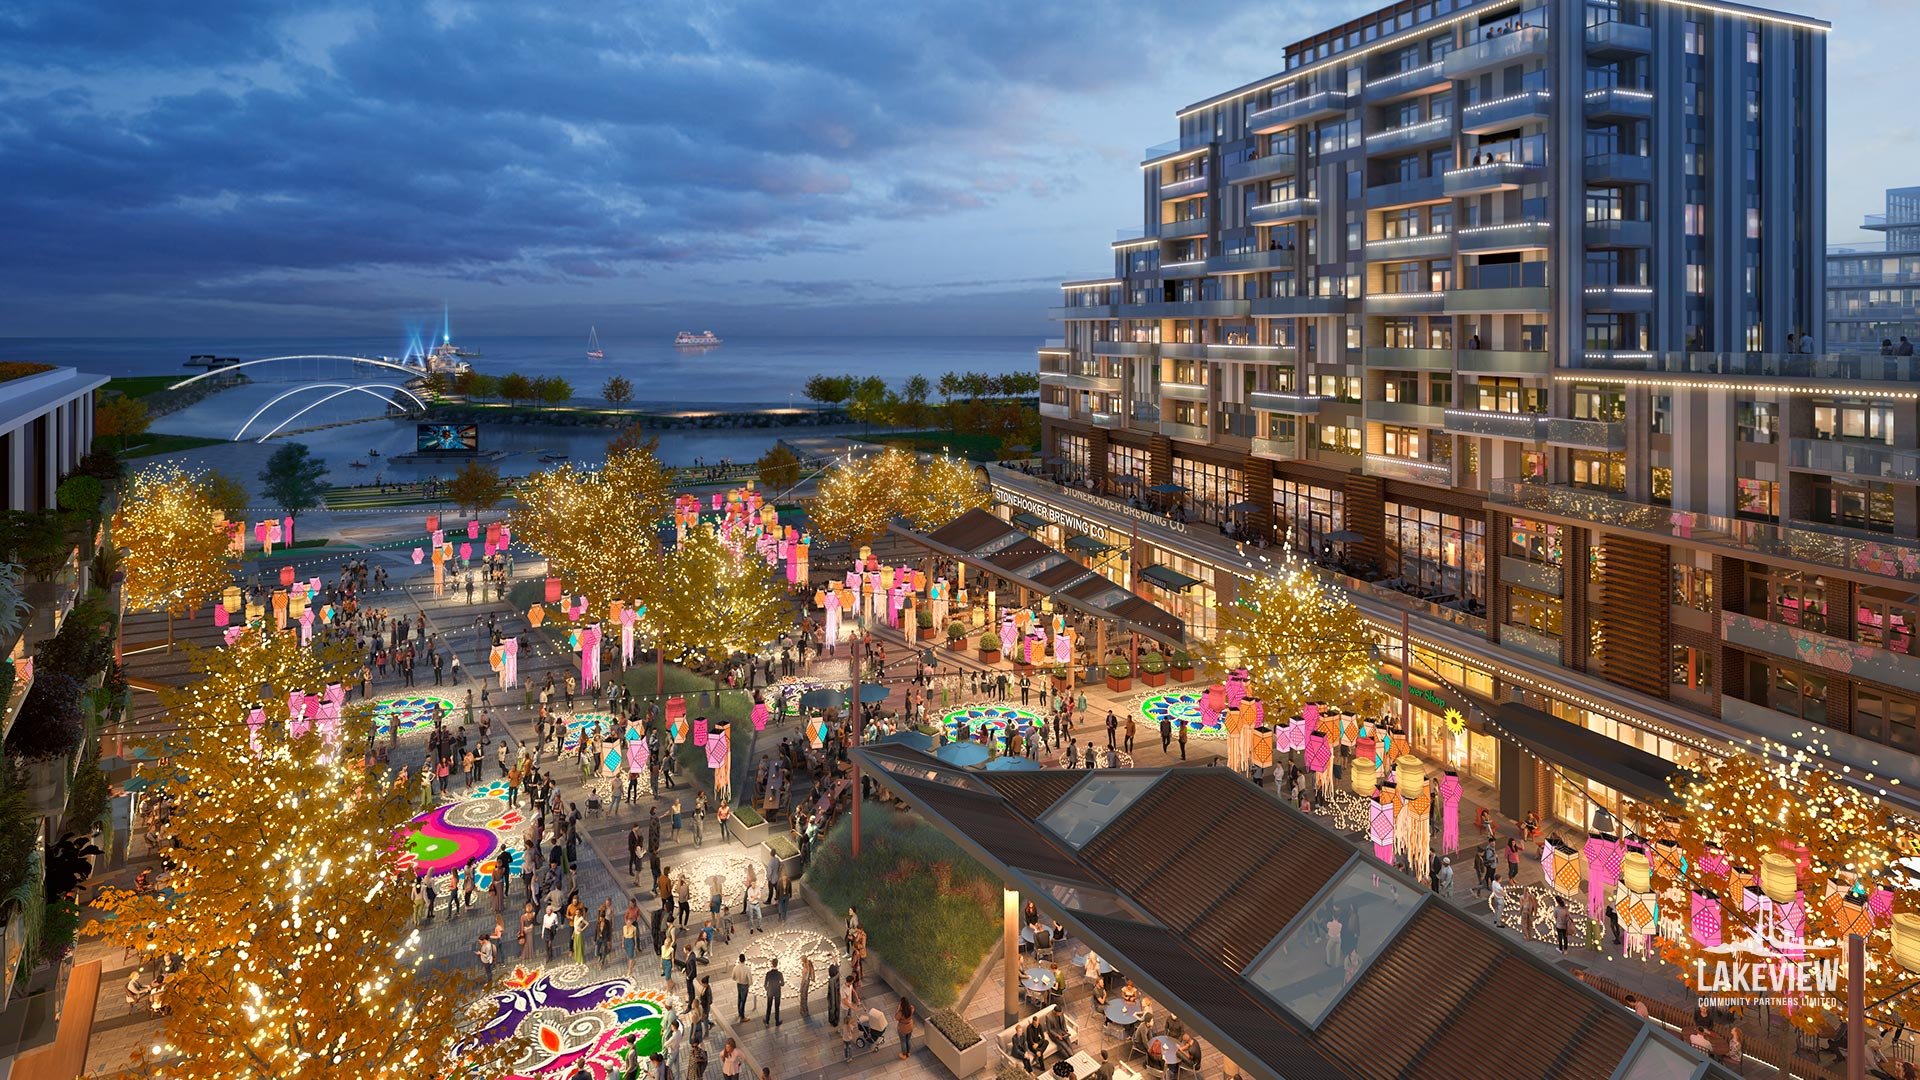 Lakeview-Square-during-Diwali-at-Fall-at-Lakeview-Village-Renderings-by-Cicada-Design-Inc.-Toronto-Canada-_-Lakeview-Community-Partners-Limited.jpg